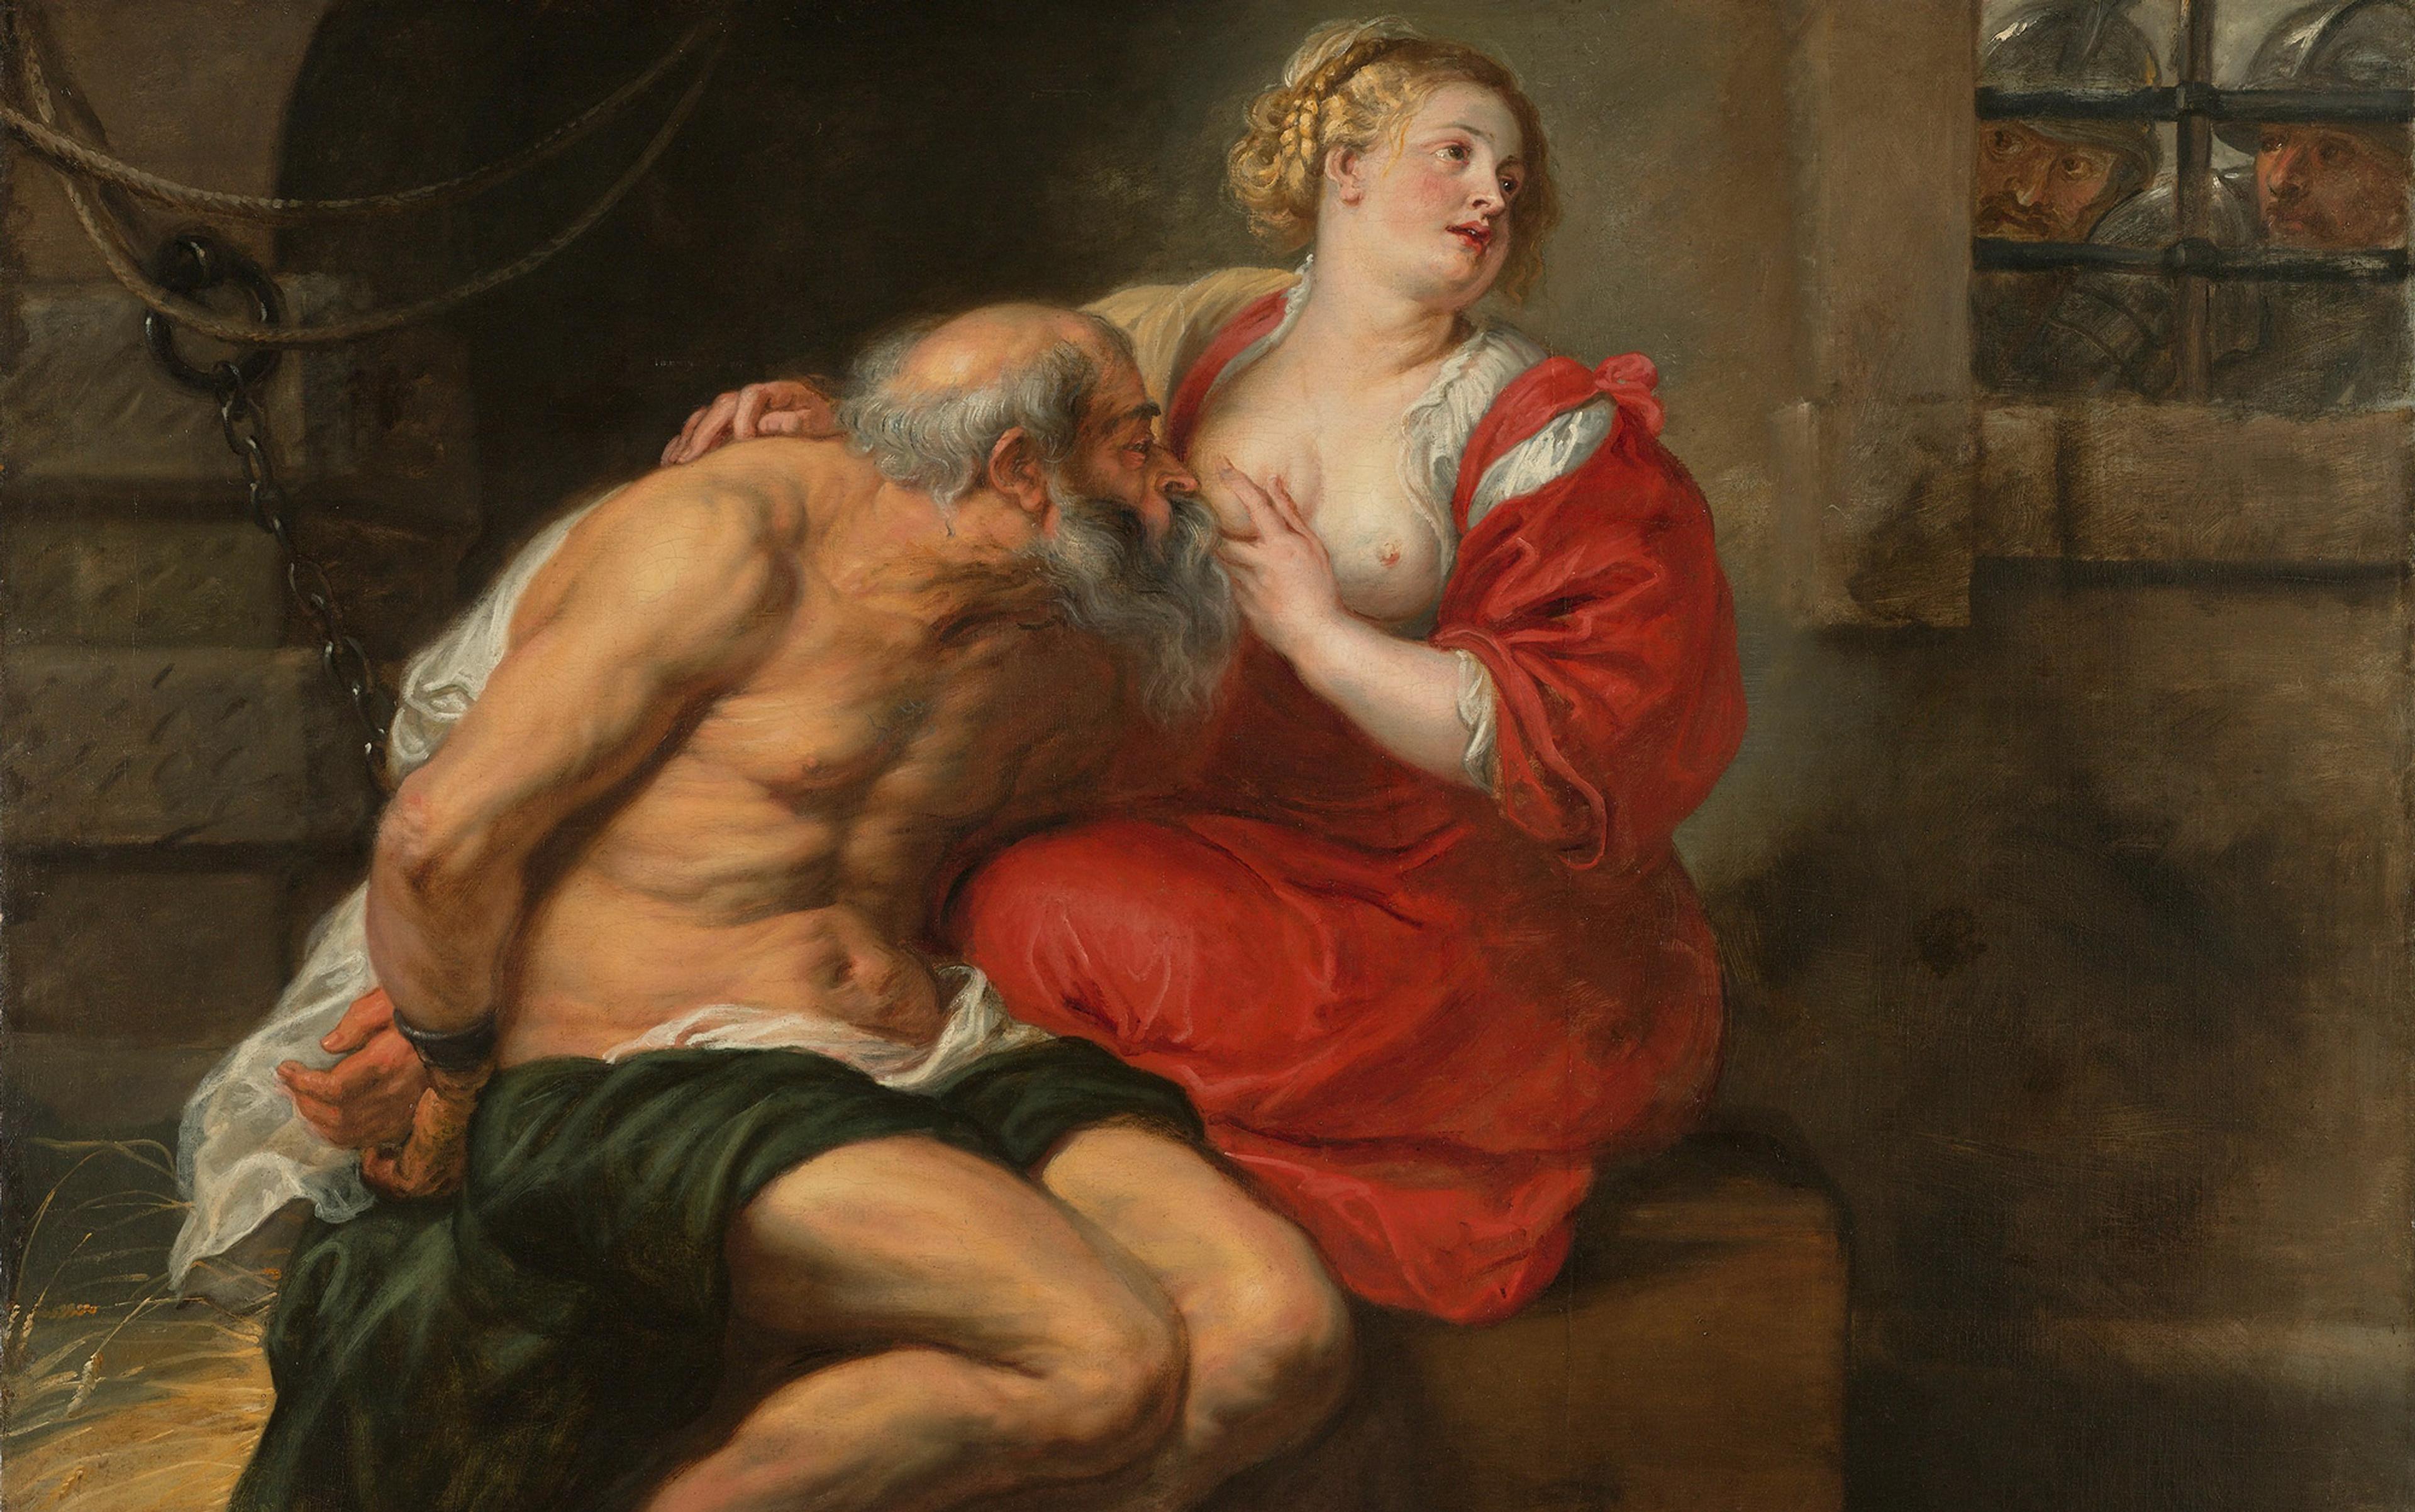 3840px x 2404px - On Roman Charity, or a woman's filial debt to the patriarchy | Aeon Essays